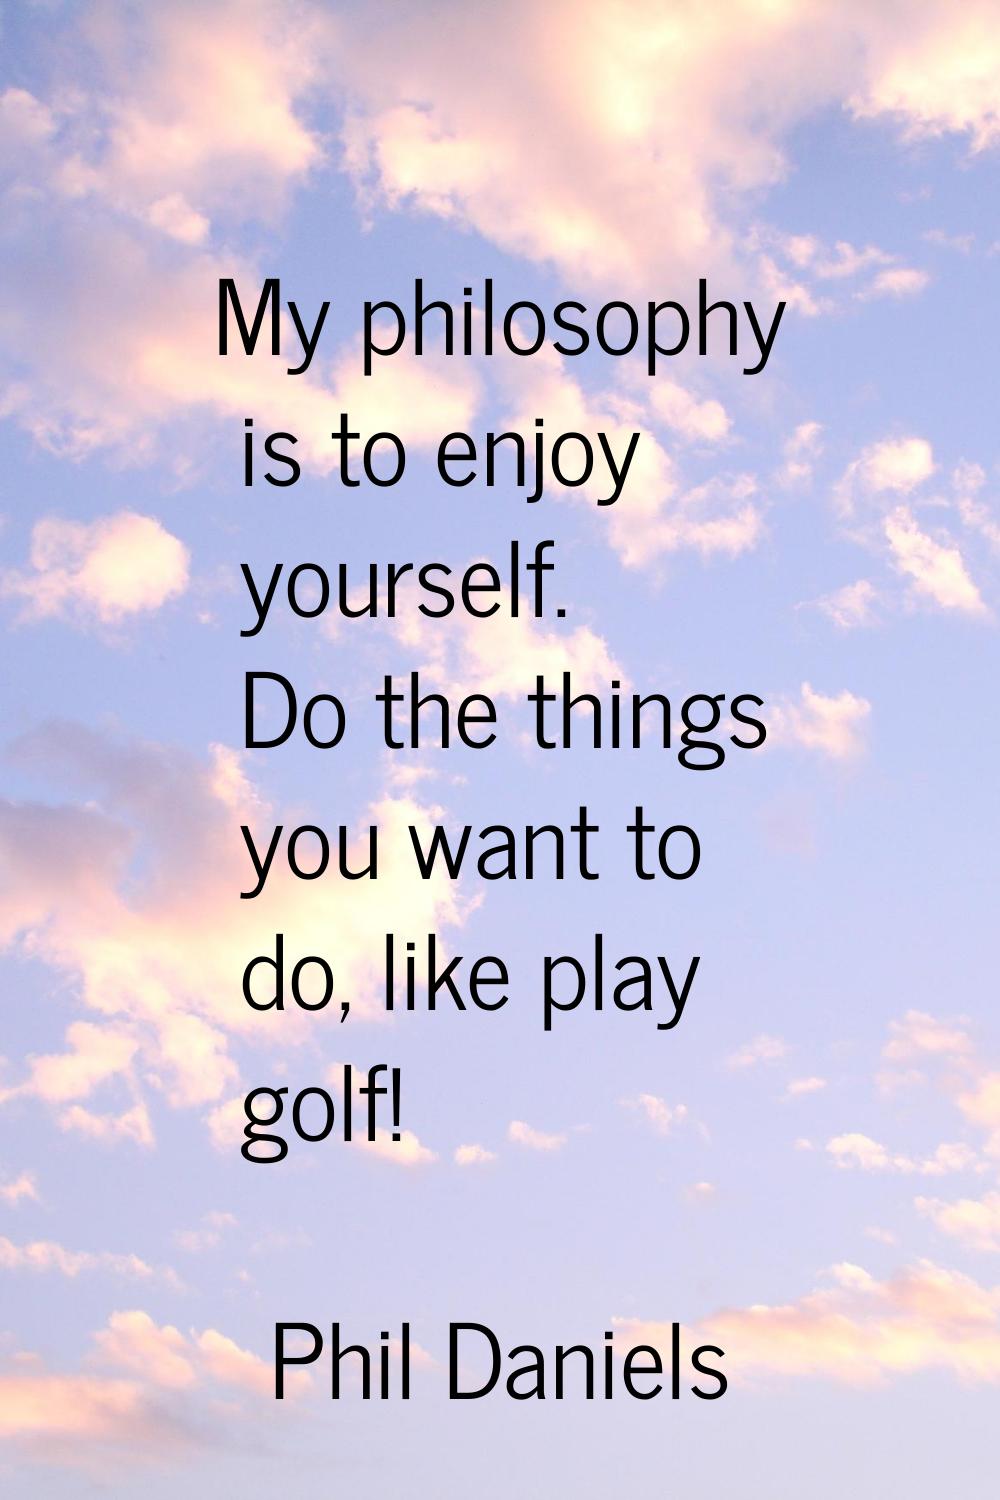 My philosophy is to enjoy yourself. Do the things you want to do, like play golf!